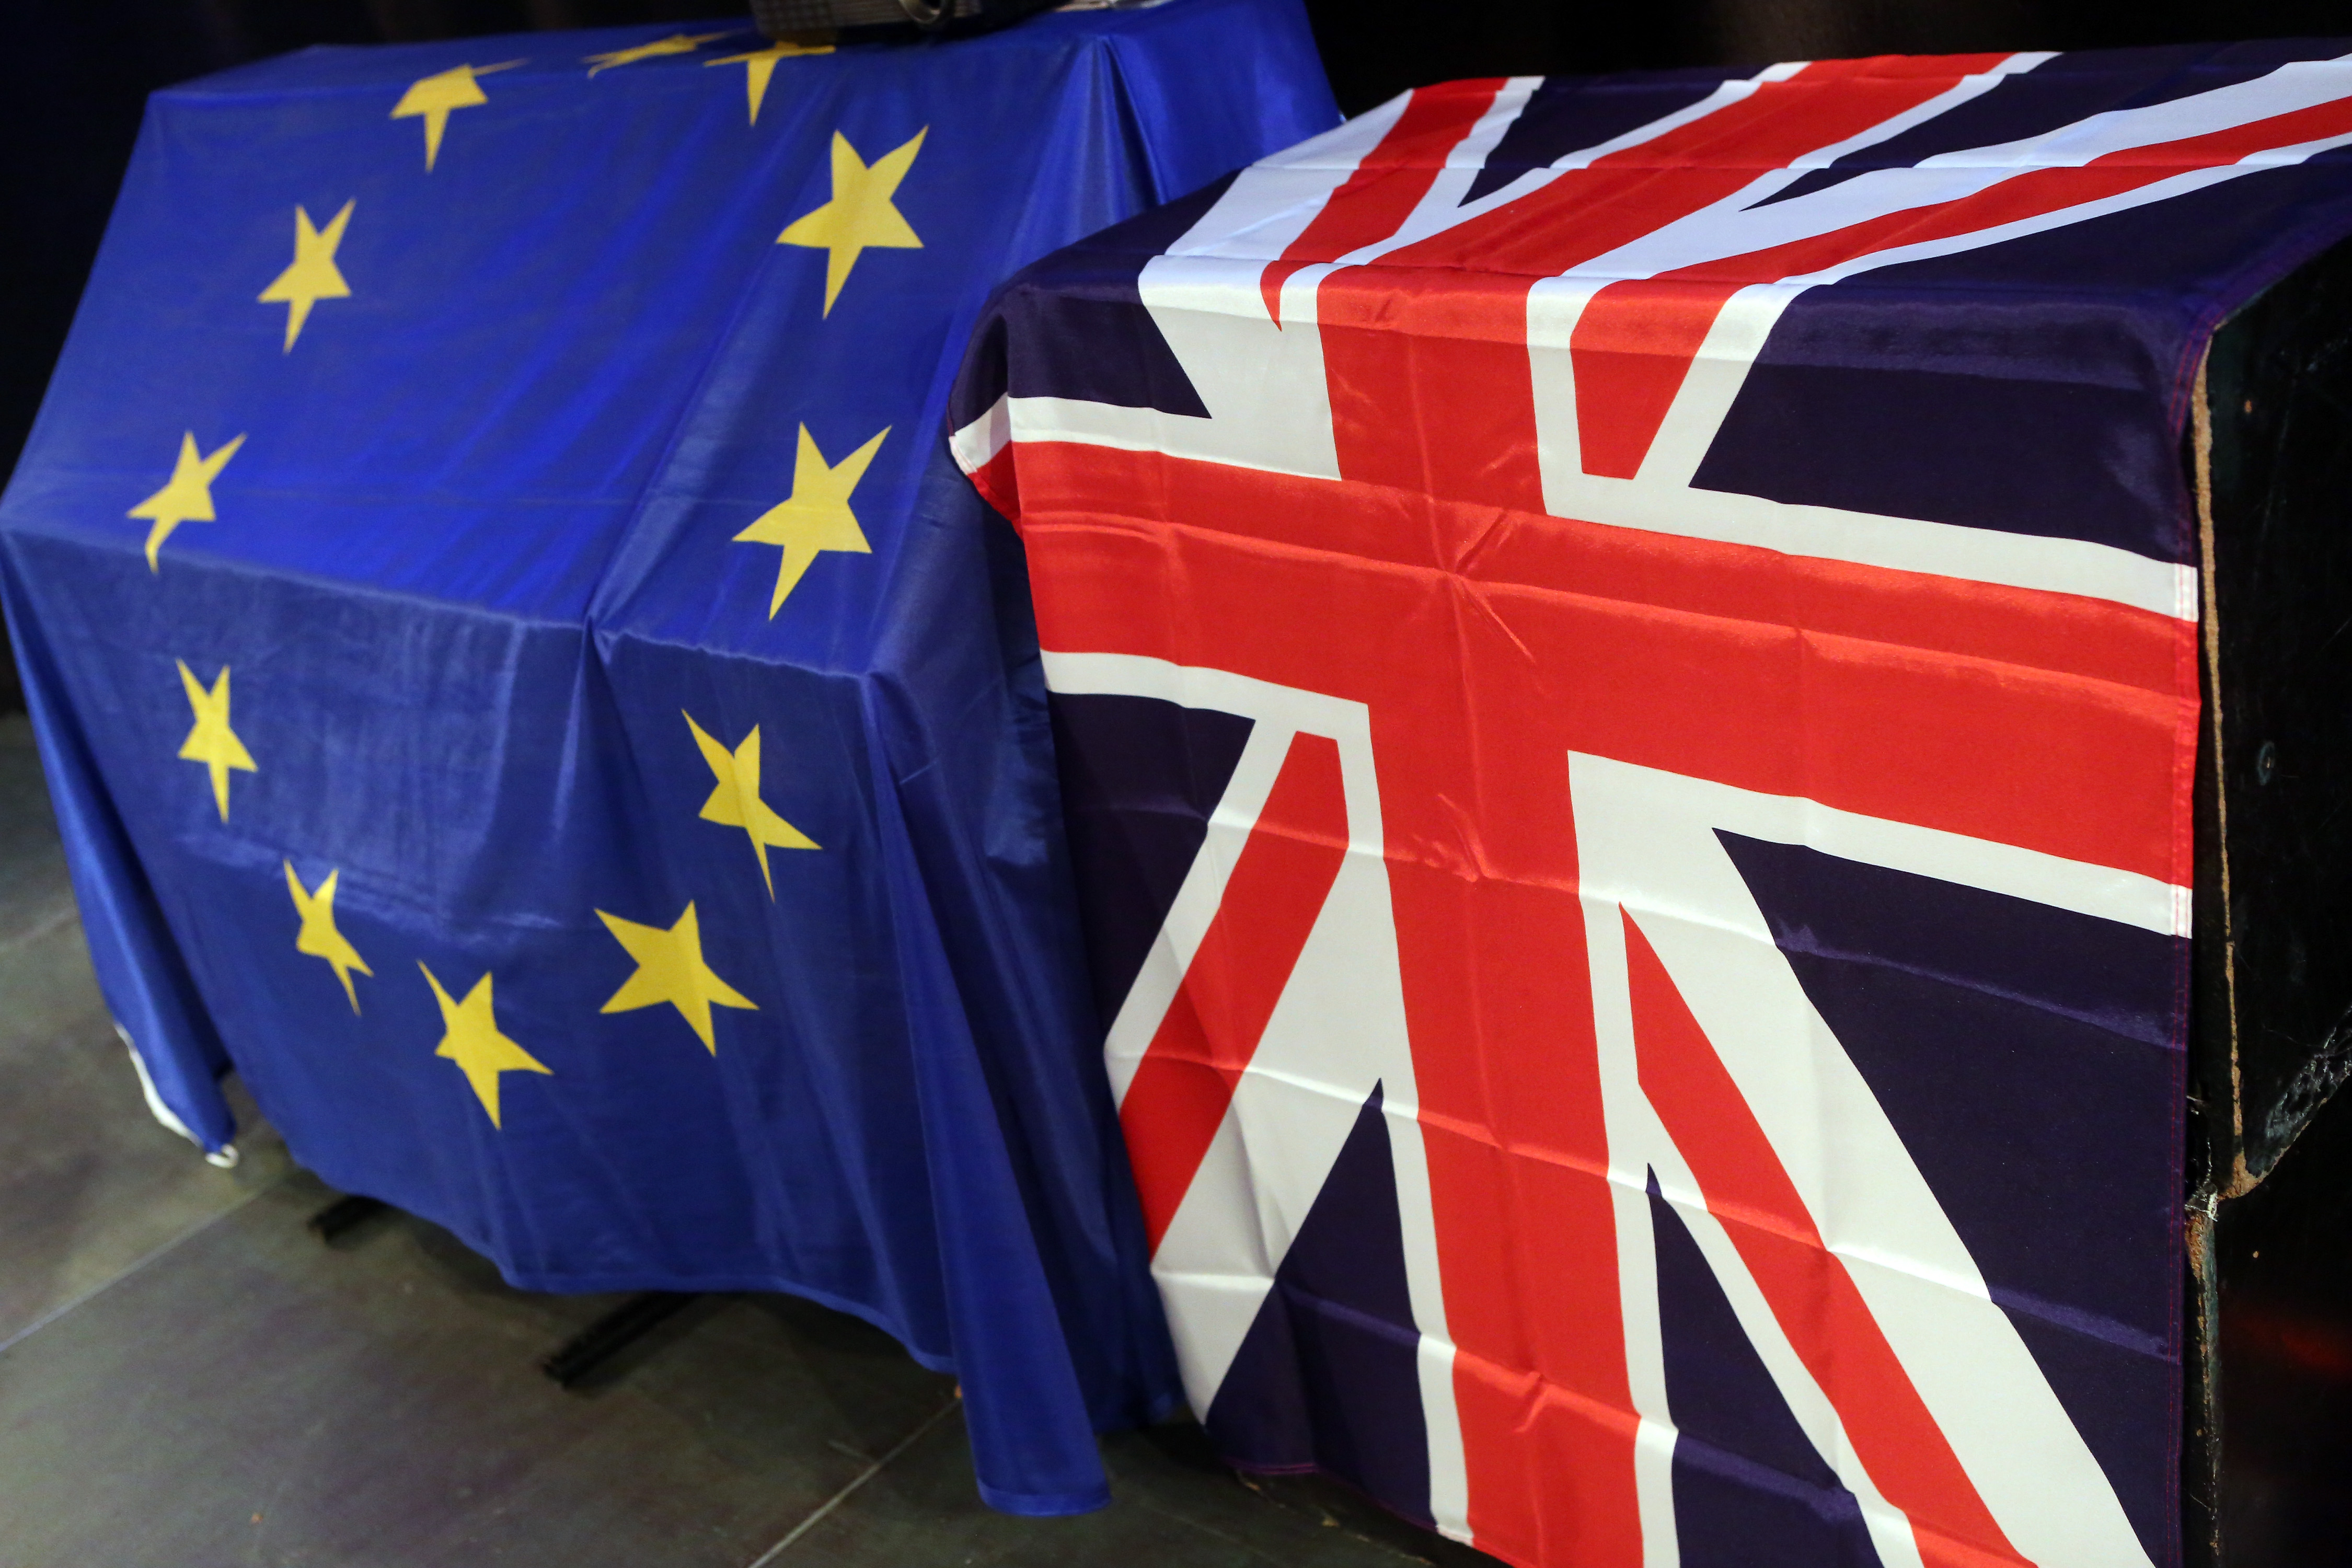 European Union and British Union Jack flags hang at a meeting for British citizens living in Germany to discuss the implications of Great Britain leaving the European Union, known popularly as Brexit, on May 26, 2016 in Berlin, Germany. (Adam Berry—Getty Images)